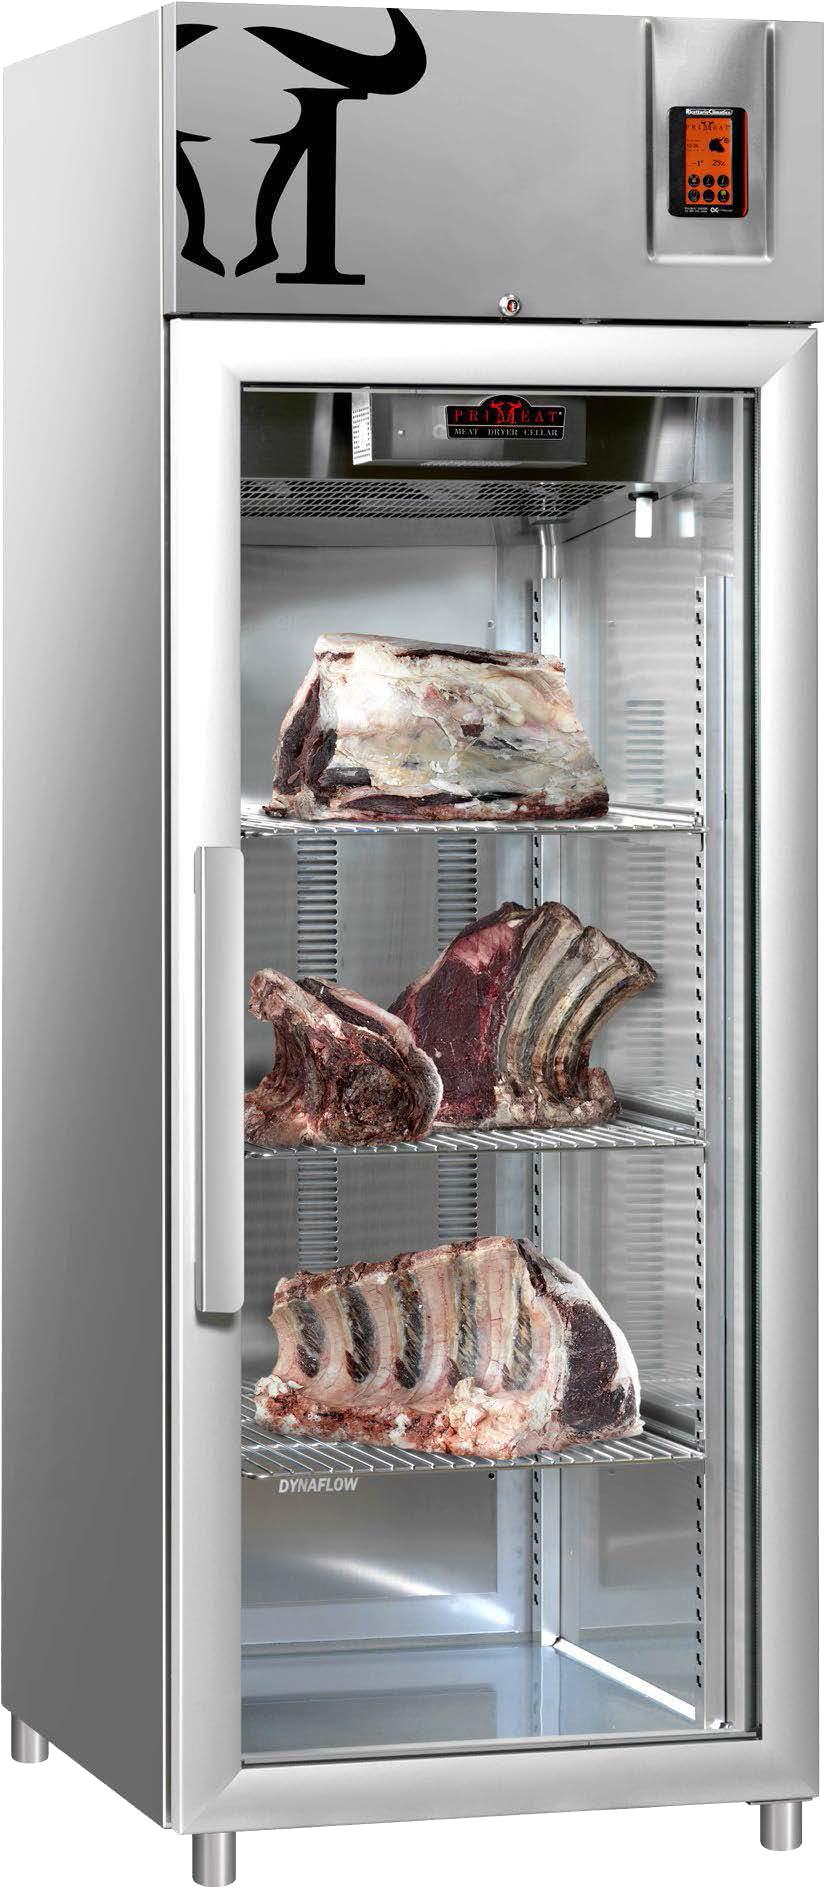 PRIMEAT® - Dry Aging conservation system, for short or long term